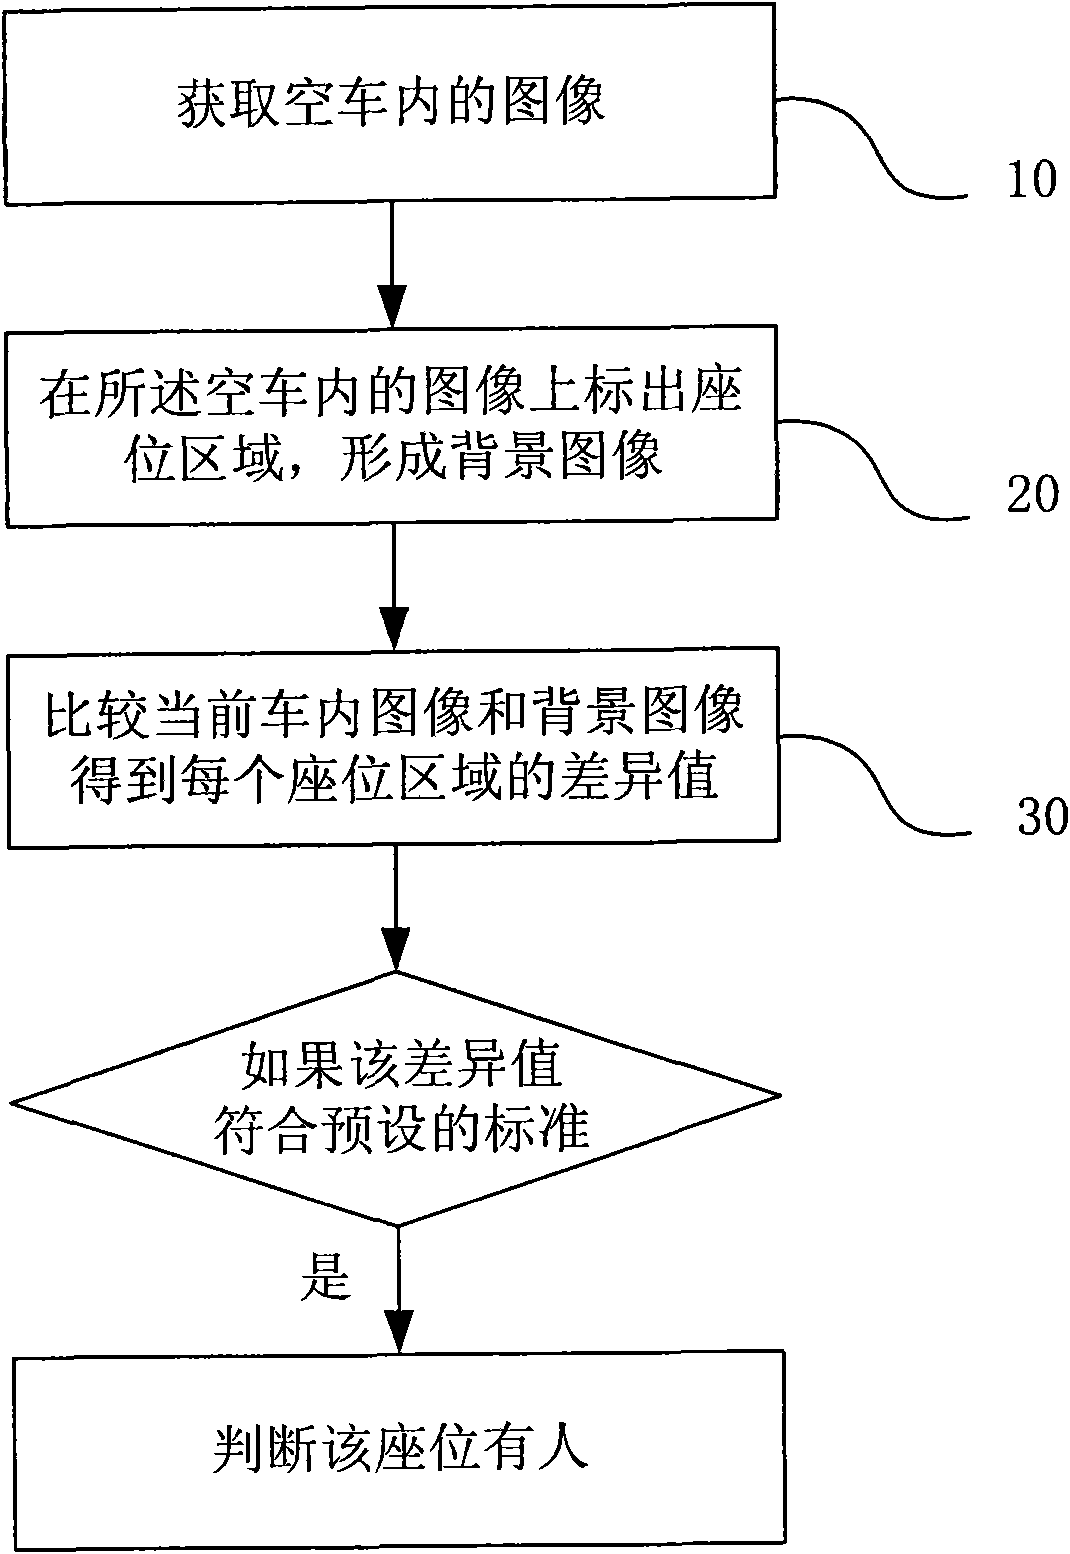 Method and system for counting number of people in car